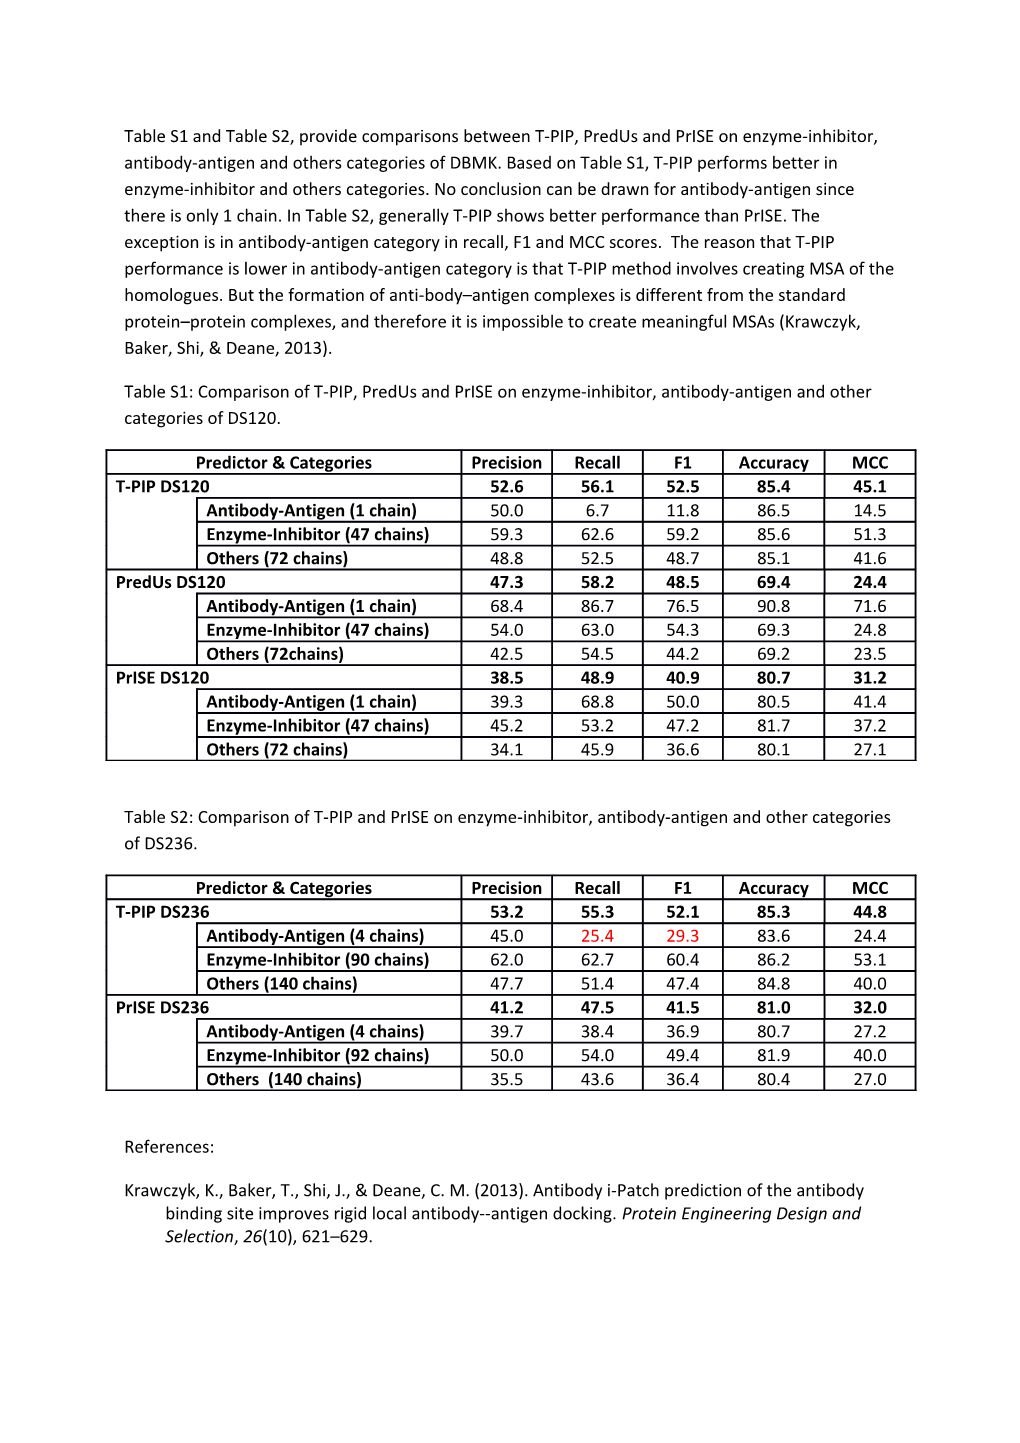 Table S2:Comparison of T-Pipand Priseon Enzyme-Inhibitor, Antibody-Antigen and Other Categories